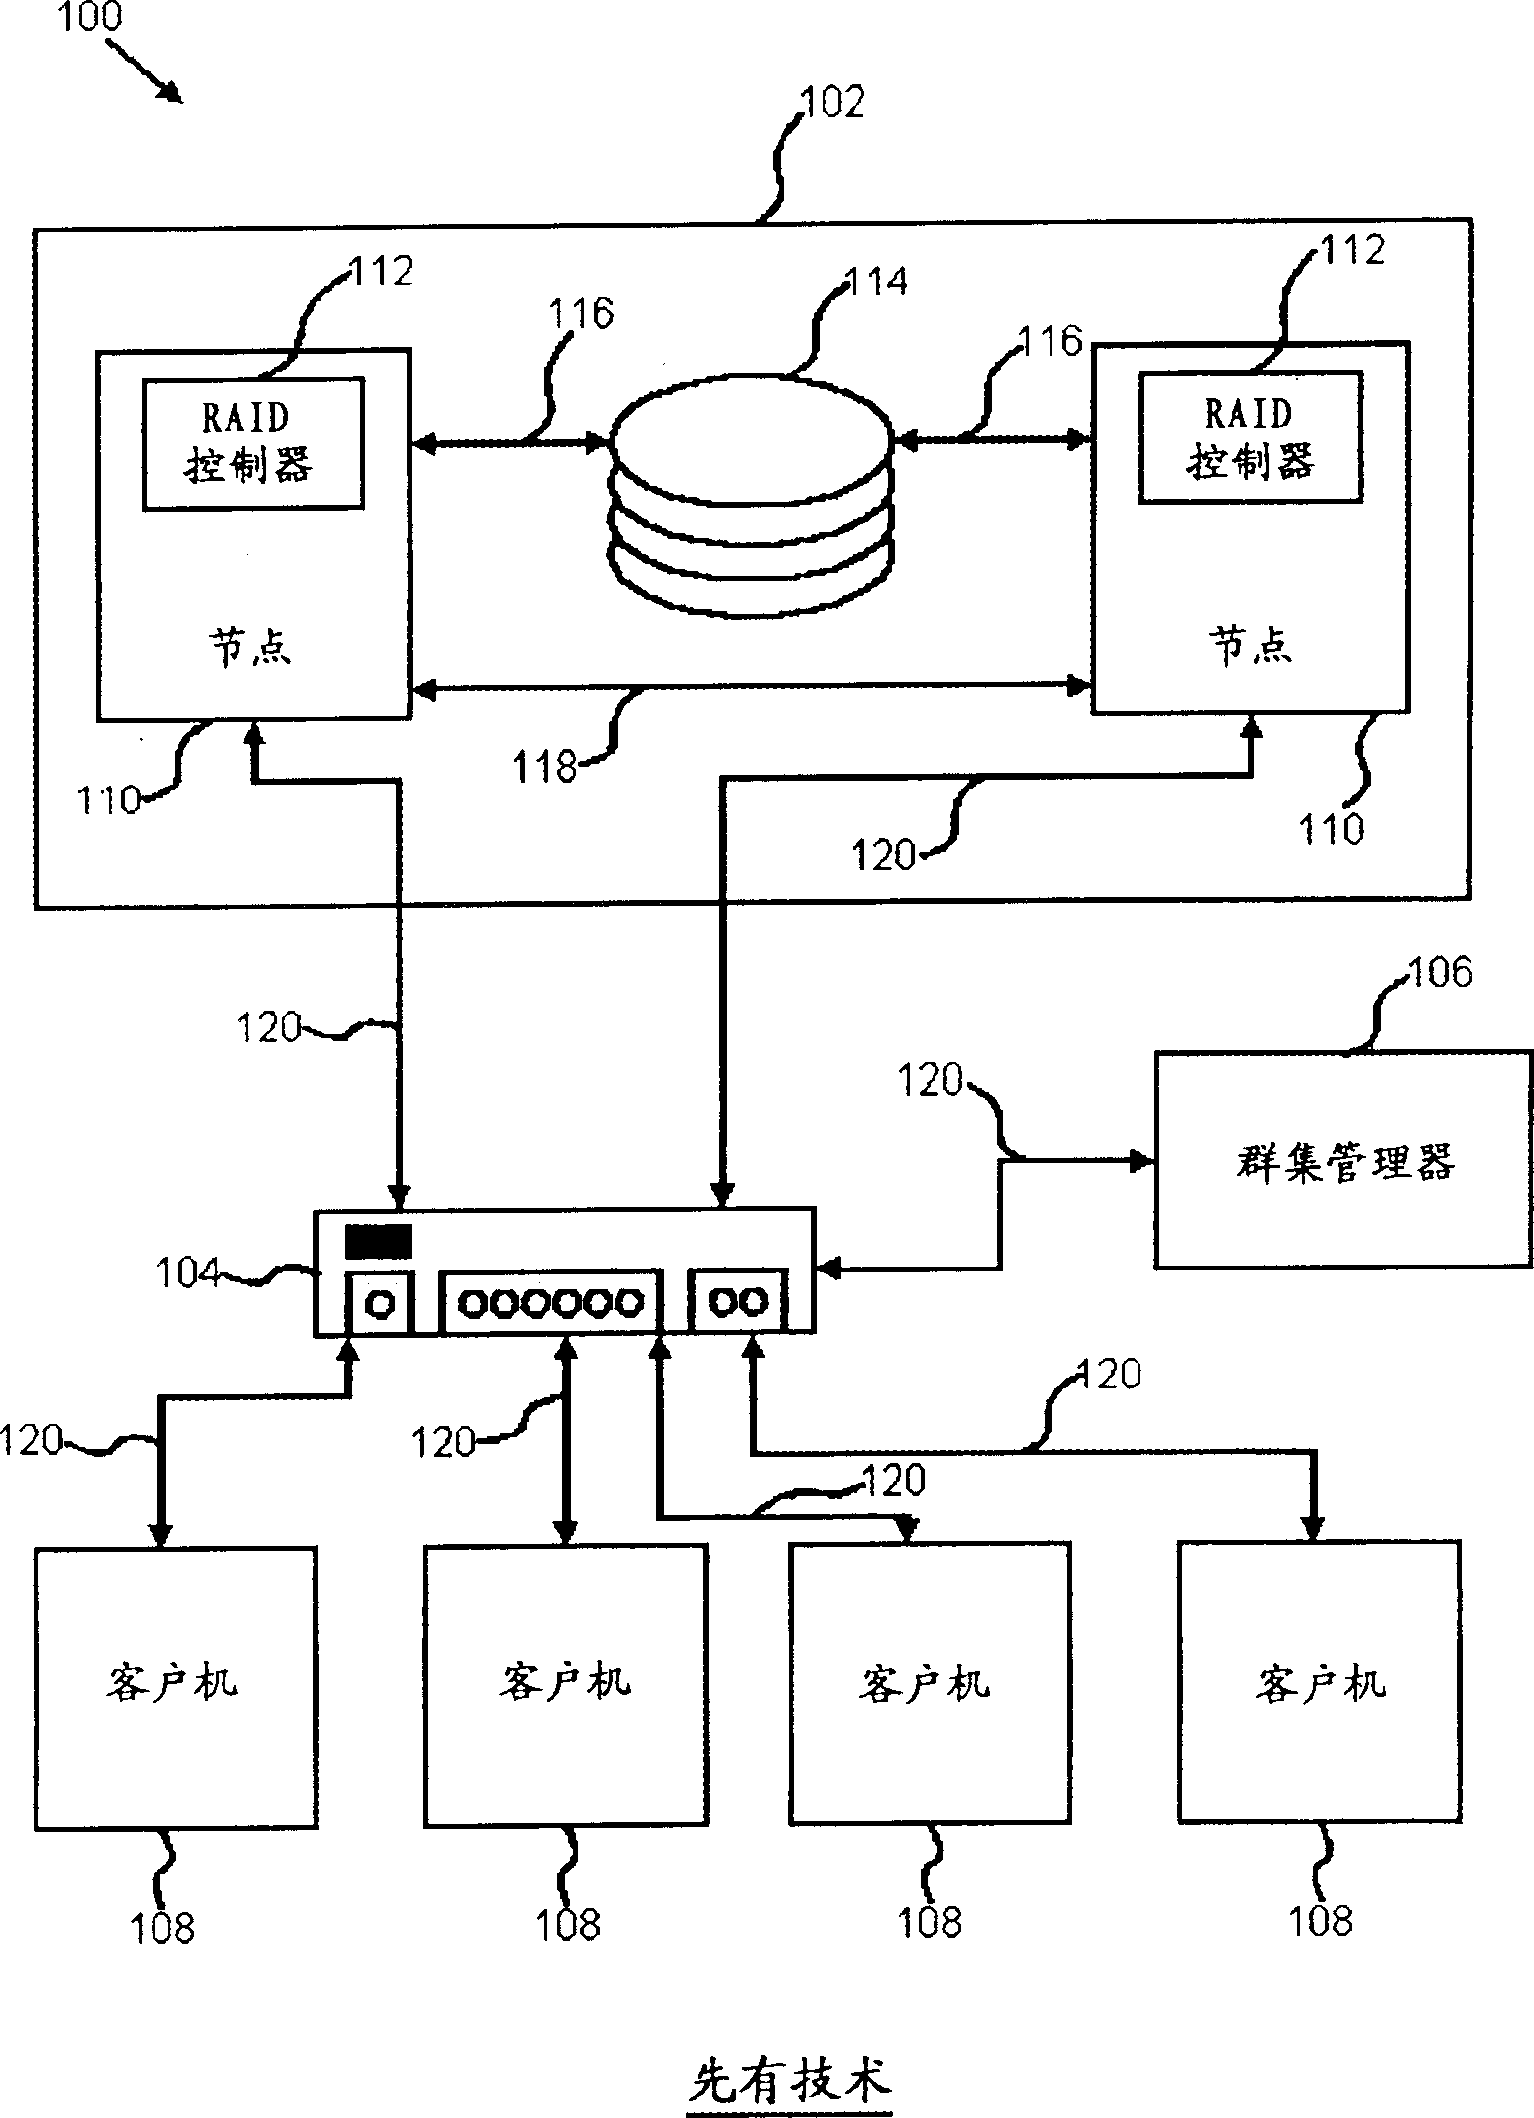 Method and device for reliable fault transferring non-complete RAID disc writing